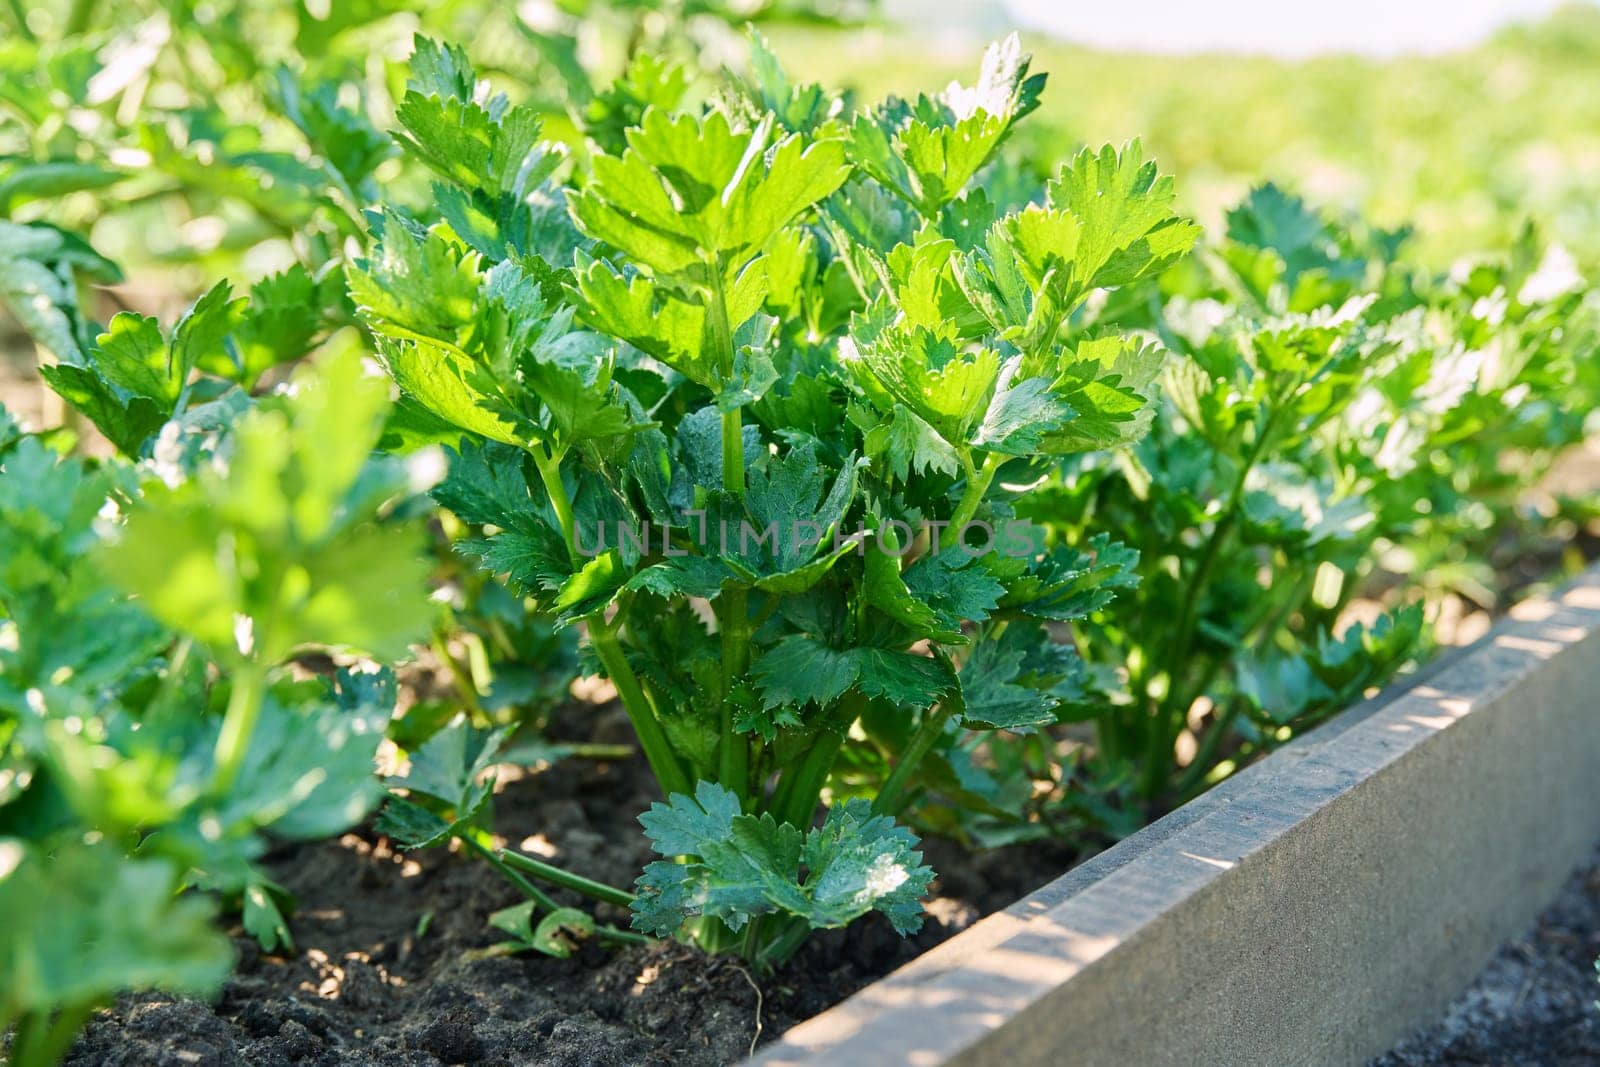 Close-up celery plant growing in a garden bed. Agriculture, farmers market, organic vegetables